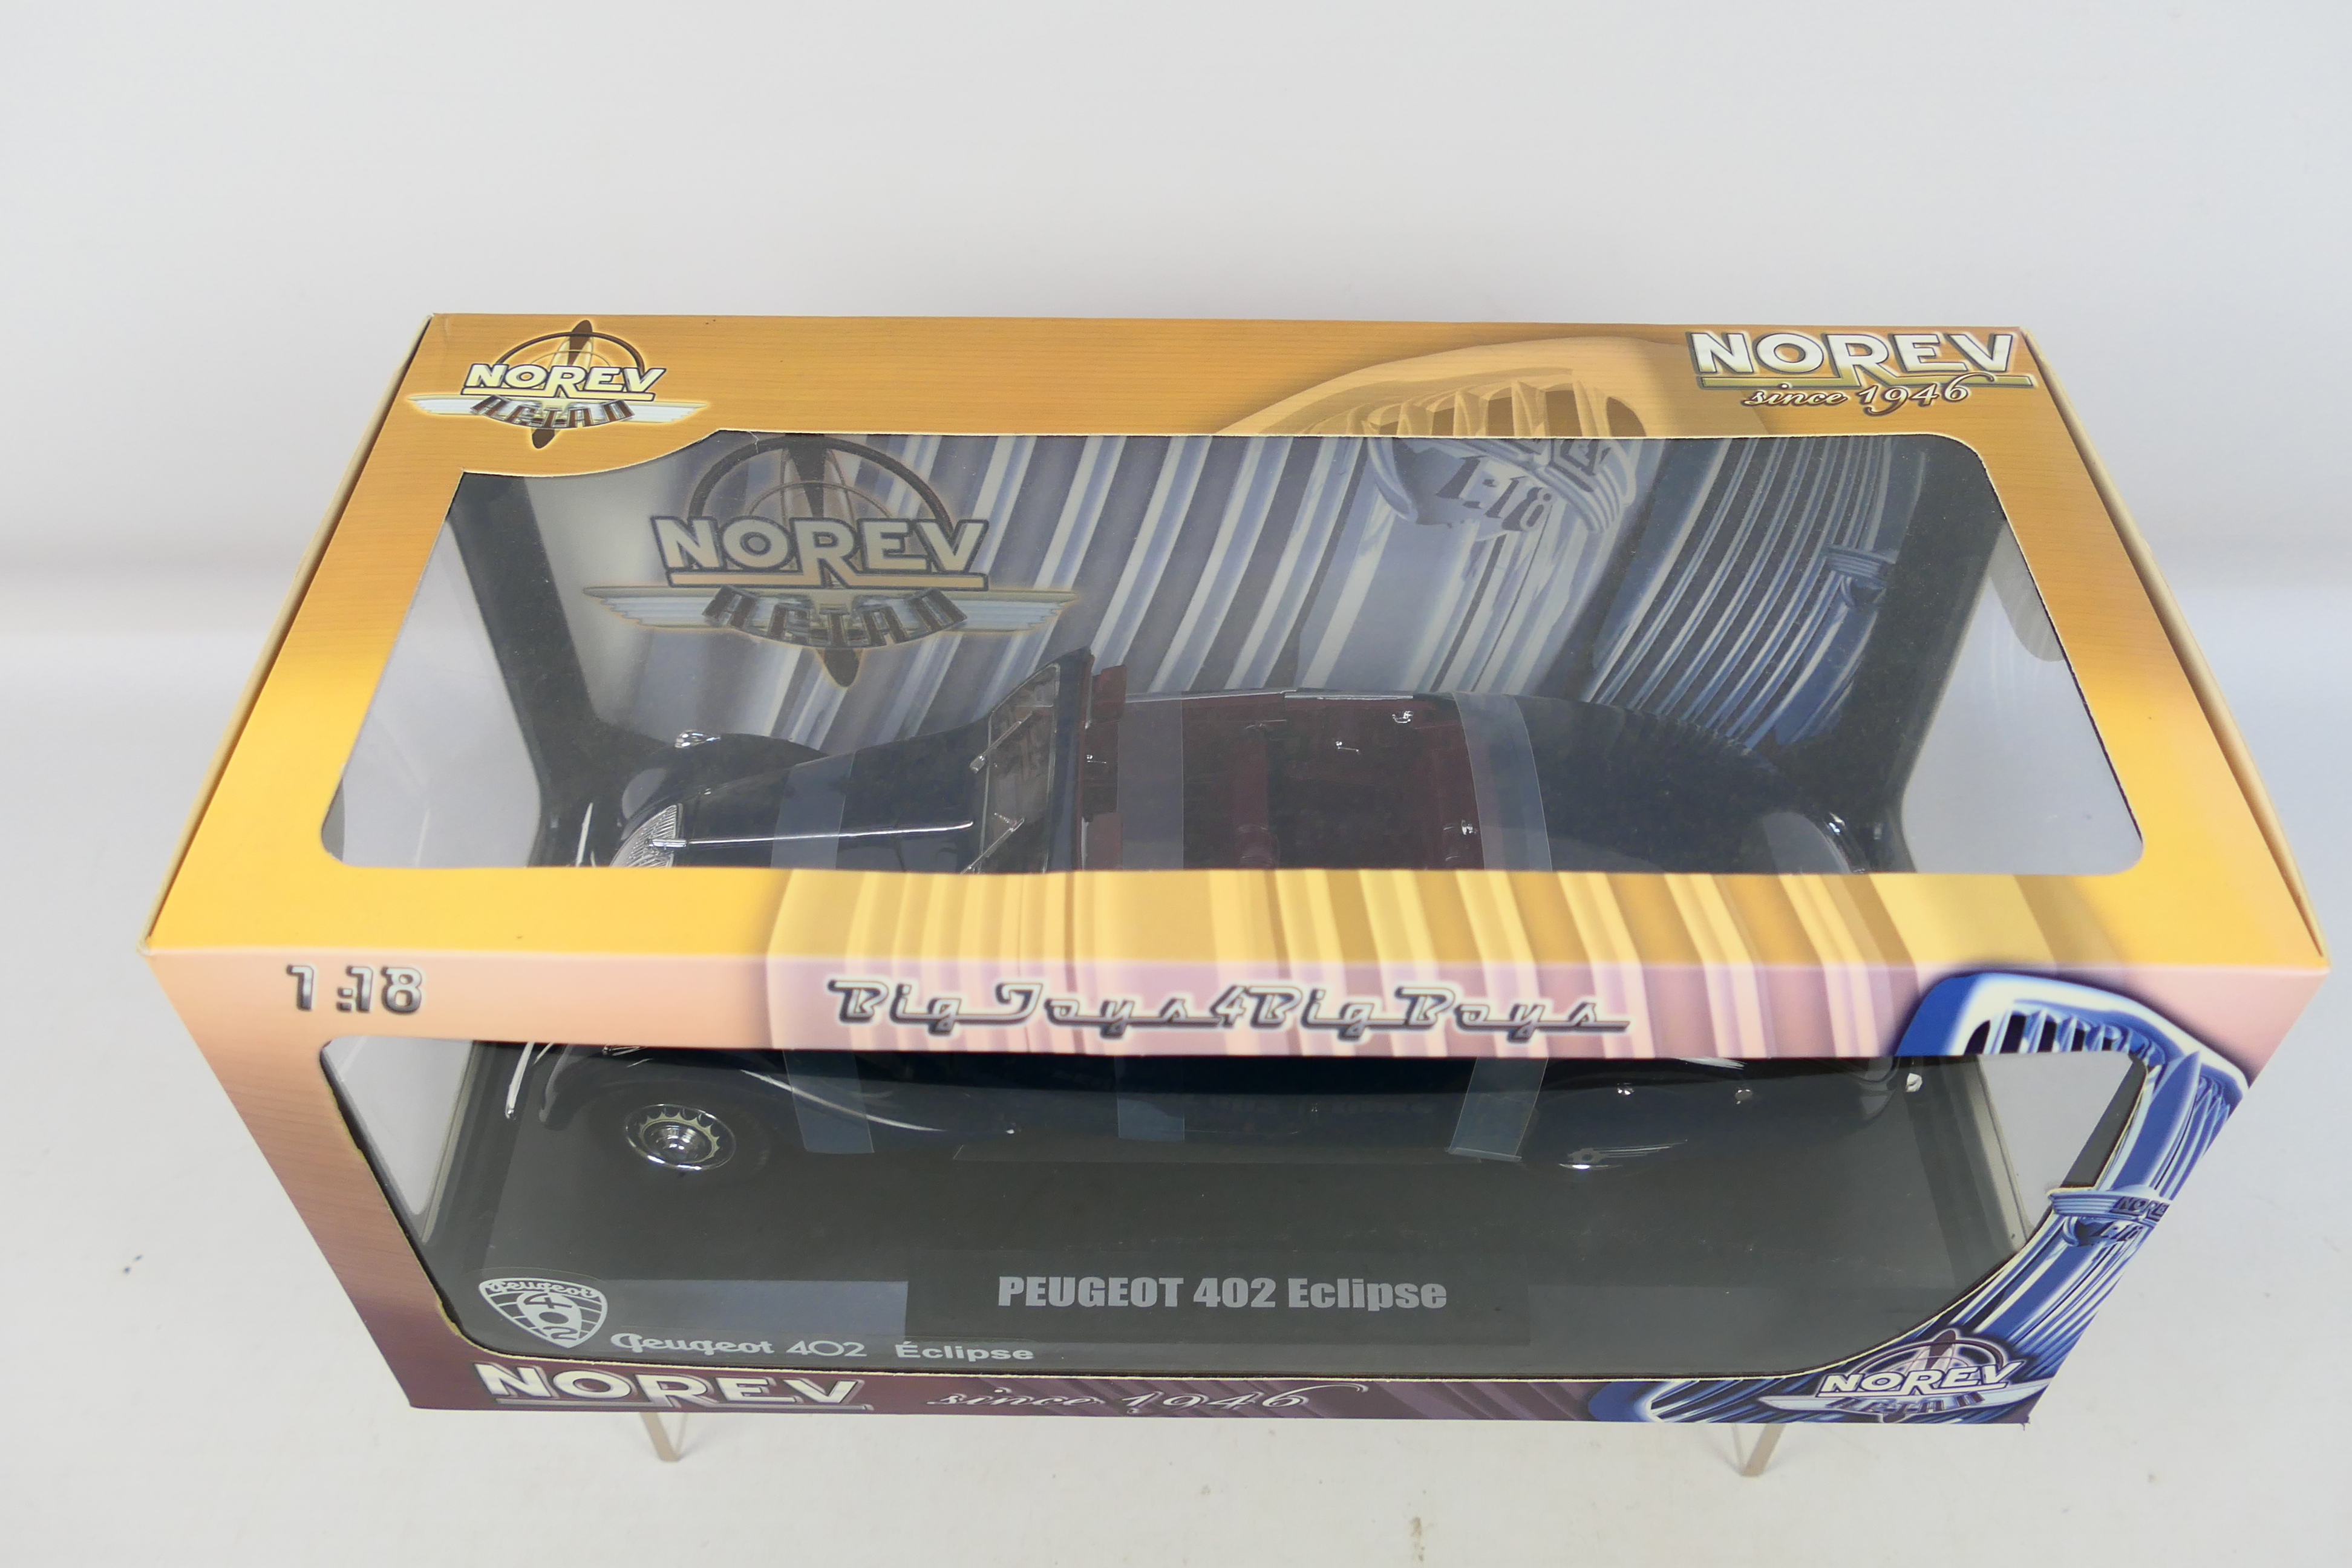 Norev - A boxed 1:18 scale Norev #184704 Peugeot 402 Eclipse. - Image 3 of 5